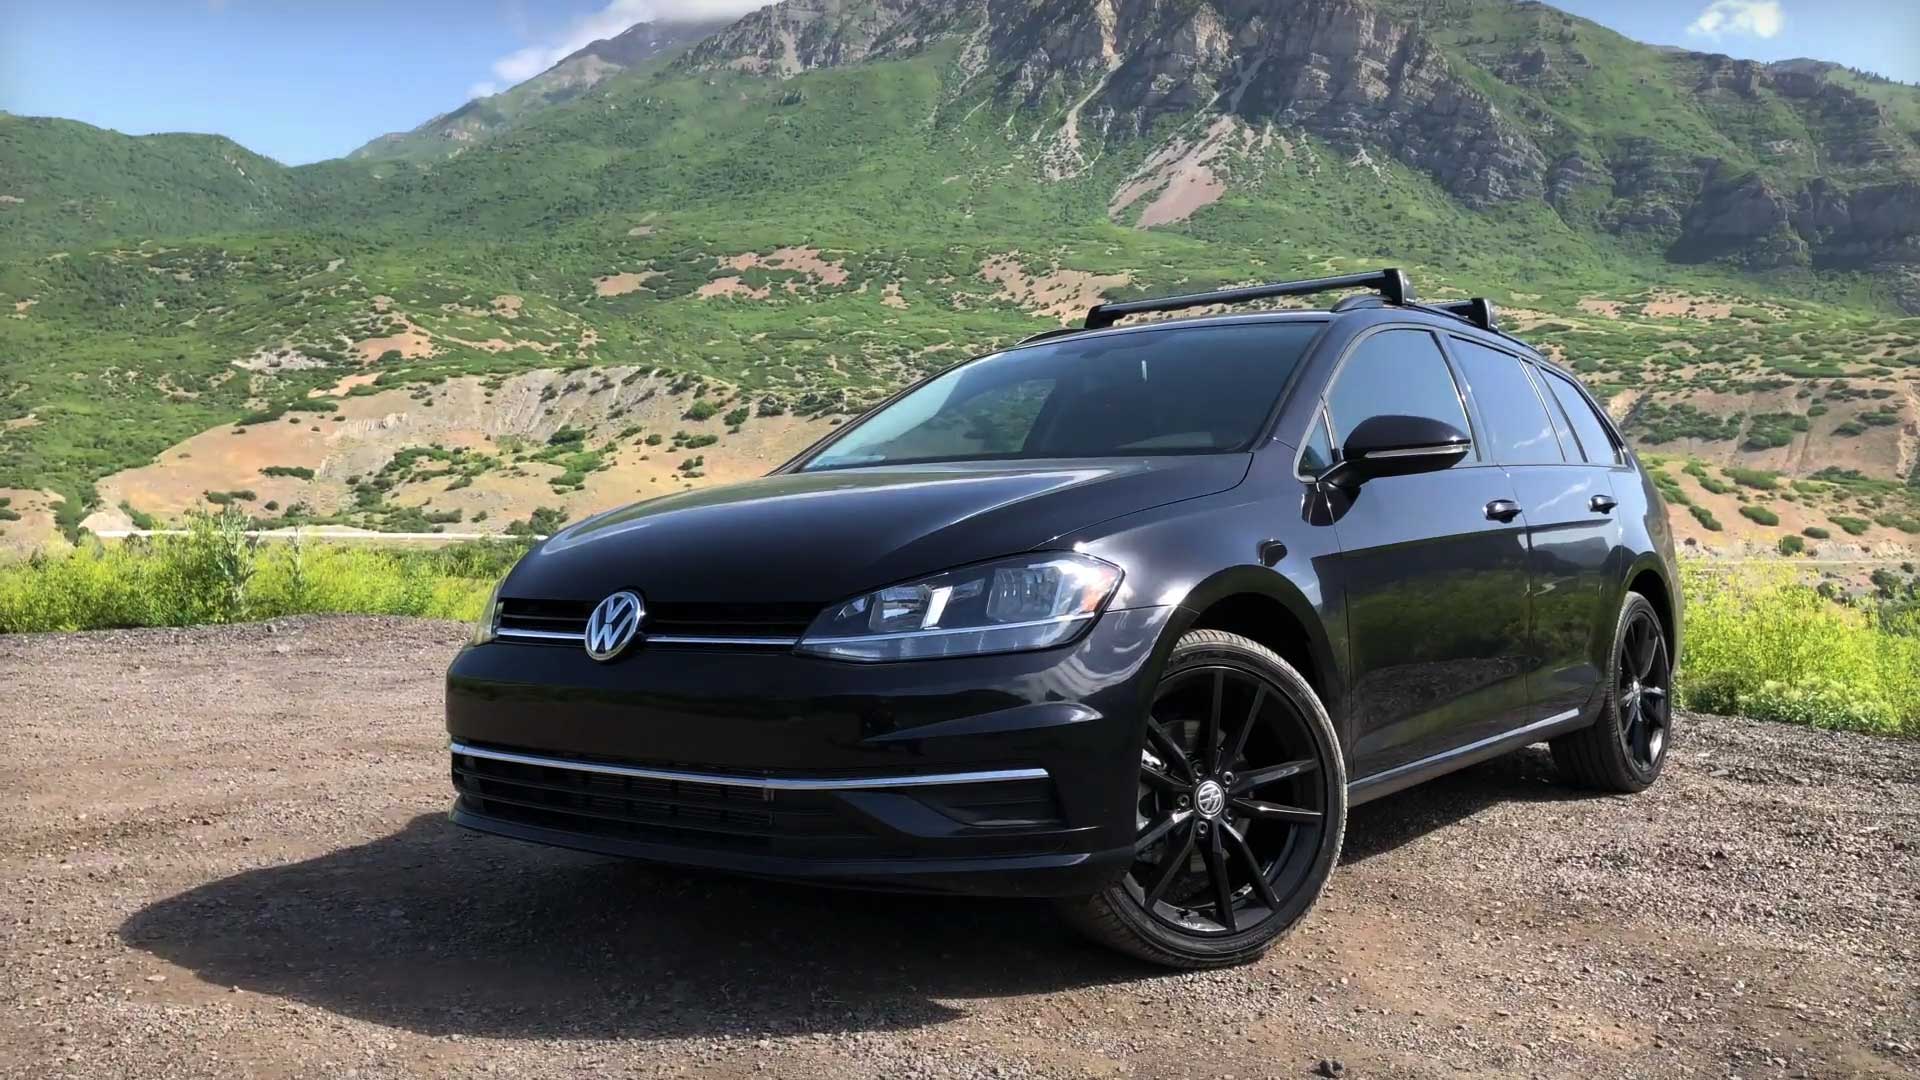 4 Reasons Why The 2018 VW Golf SportWagen Is Awesome - 103.5 The Arrow